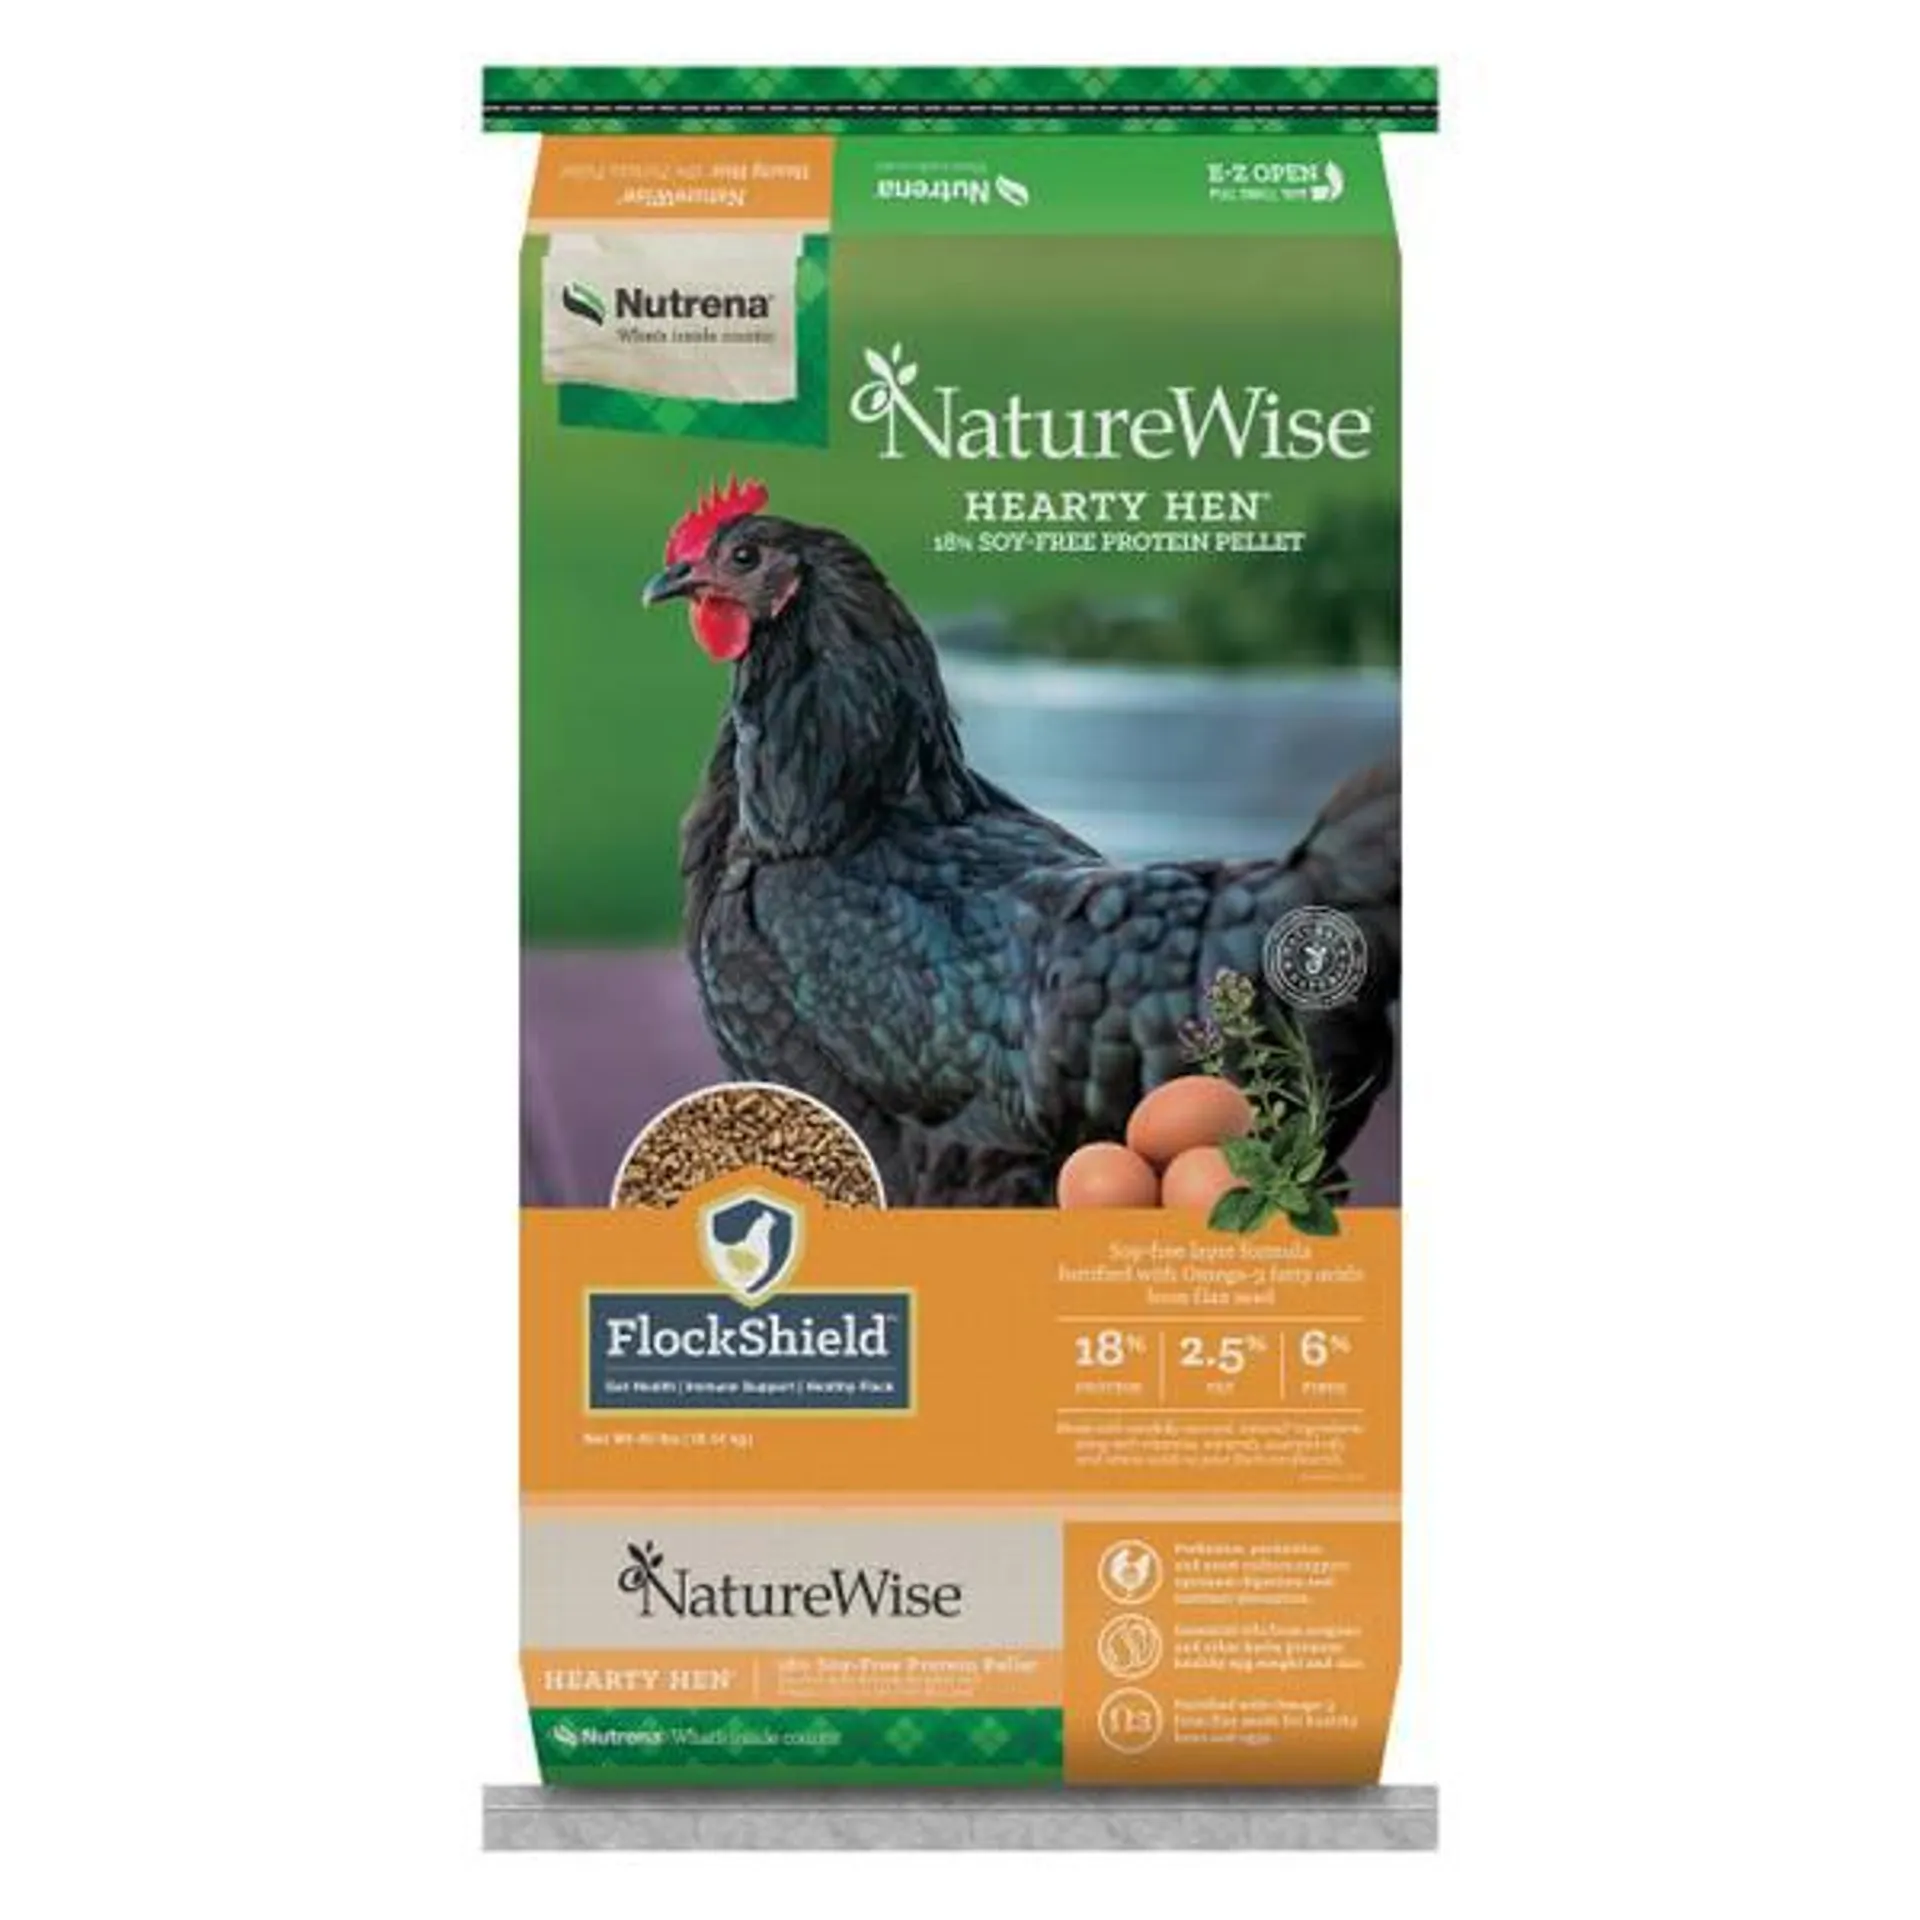 NatureWise 40 lb Hearty Hen Poultry Feed